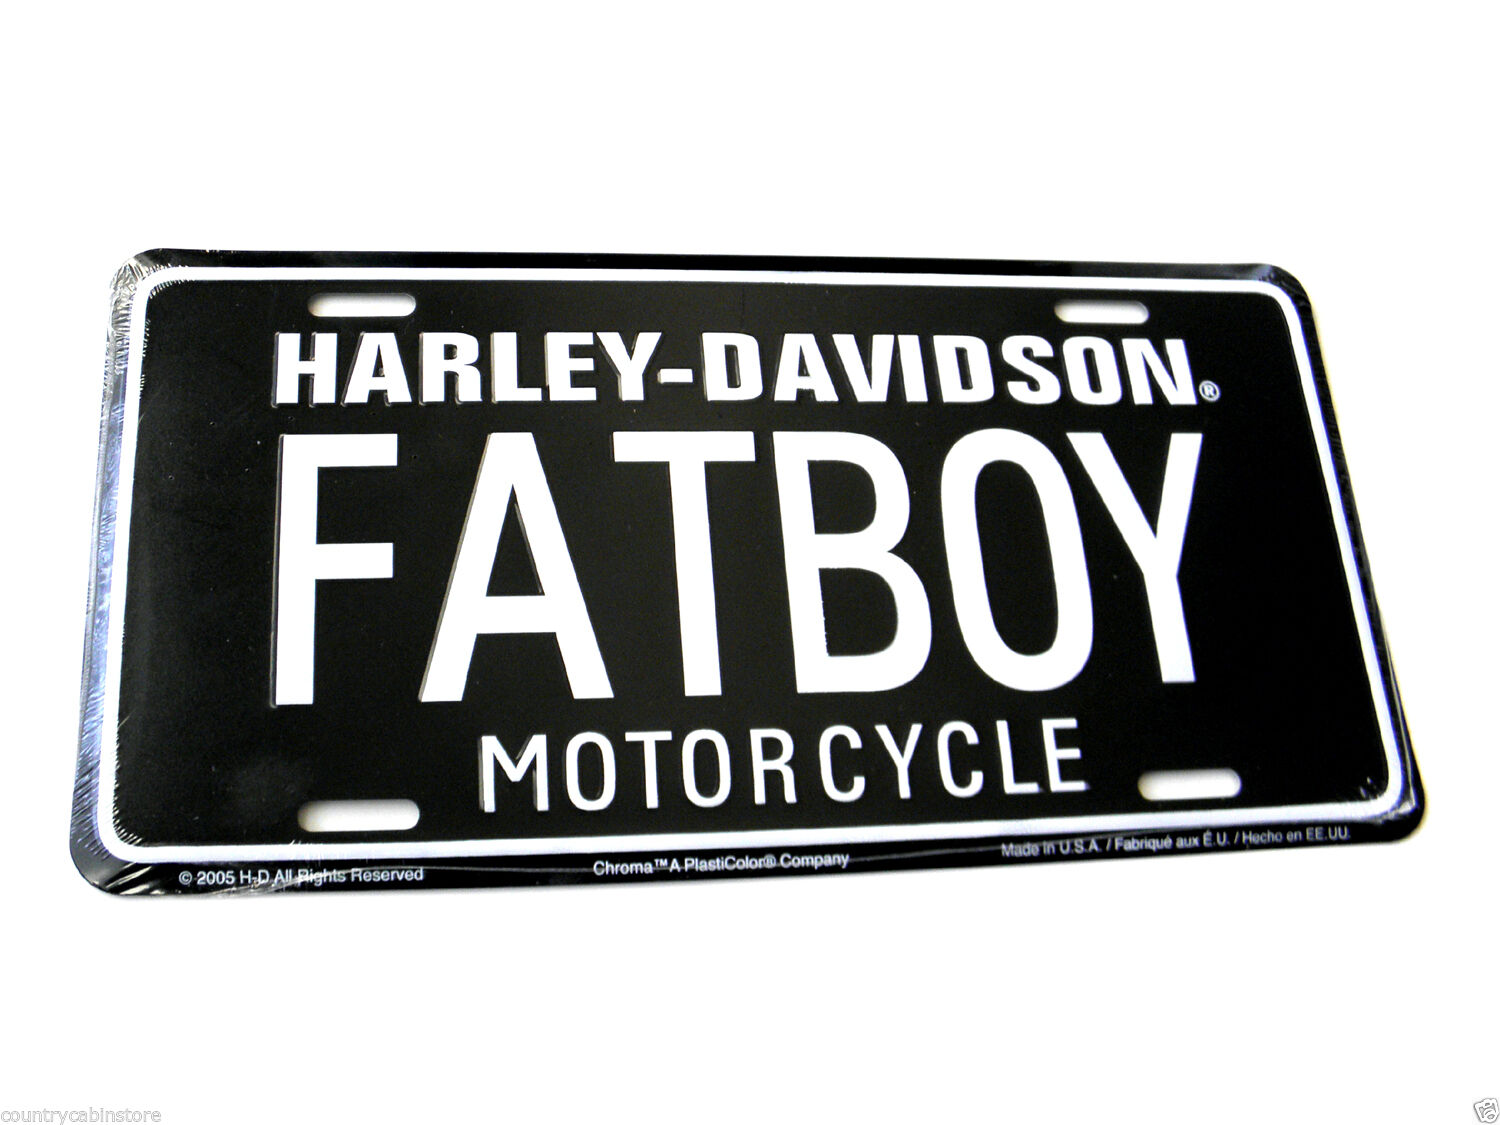 Category: Harley License Plates